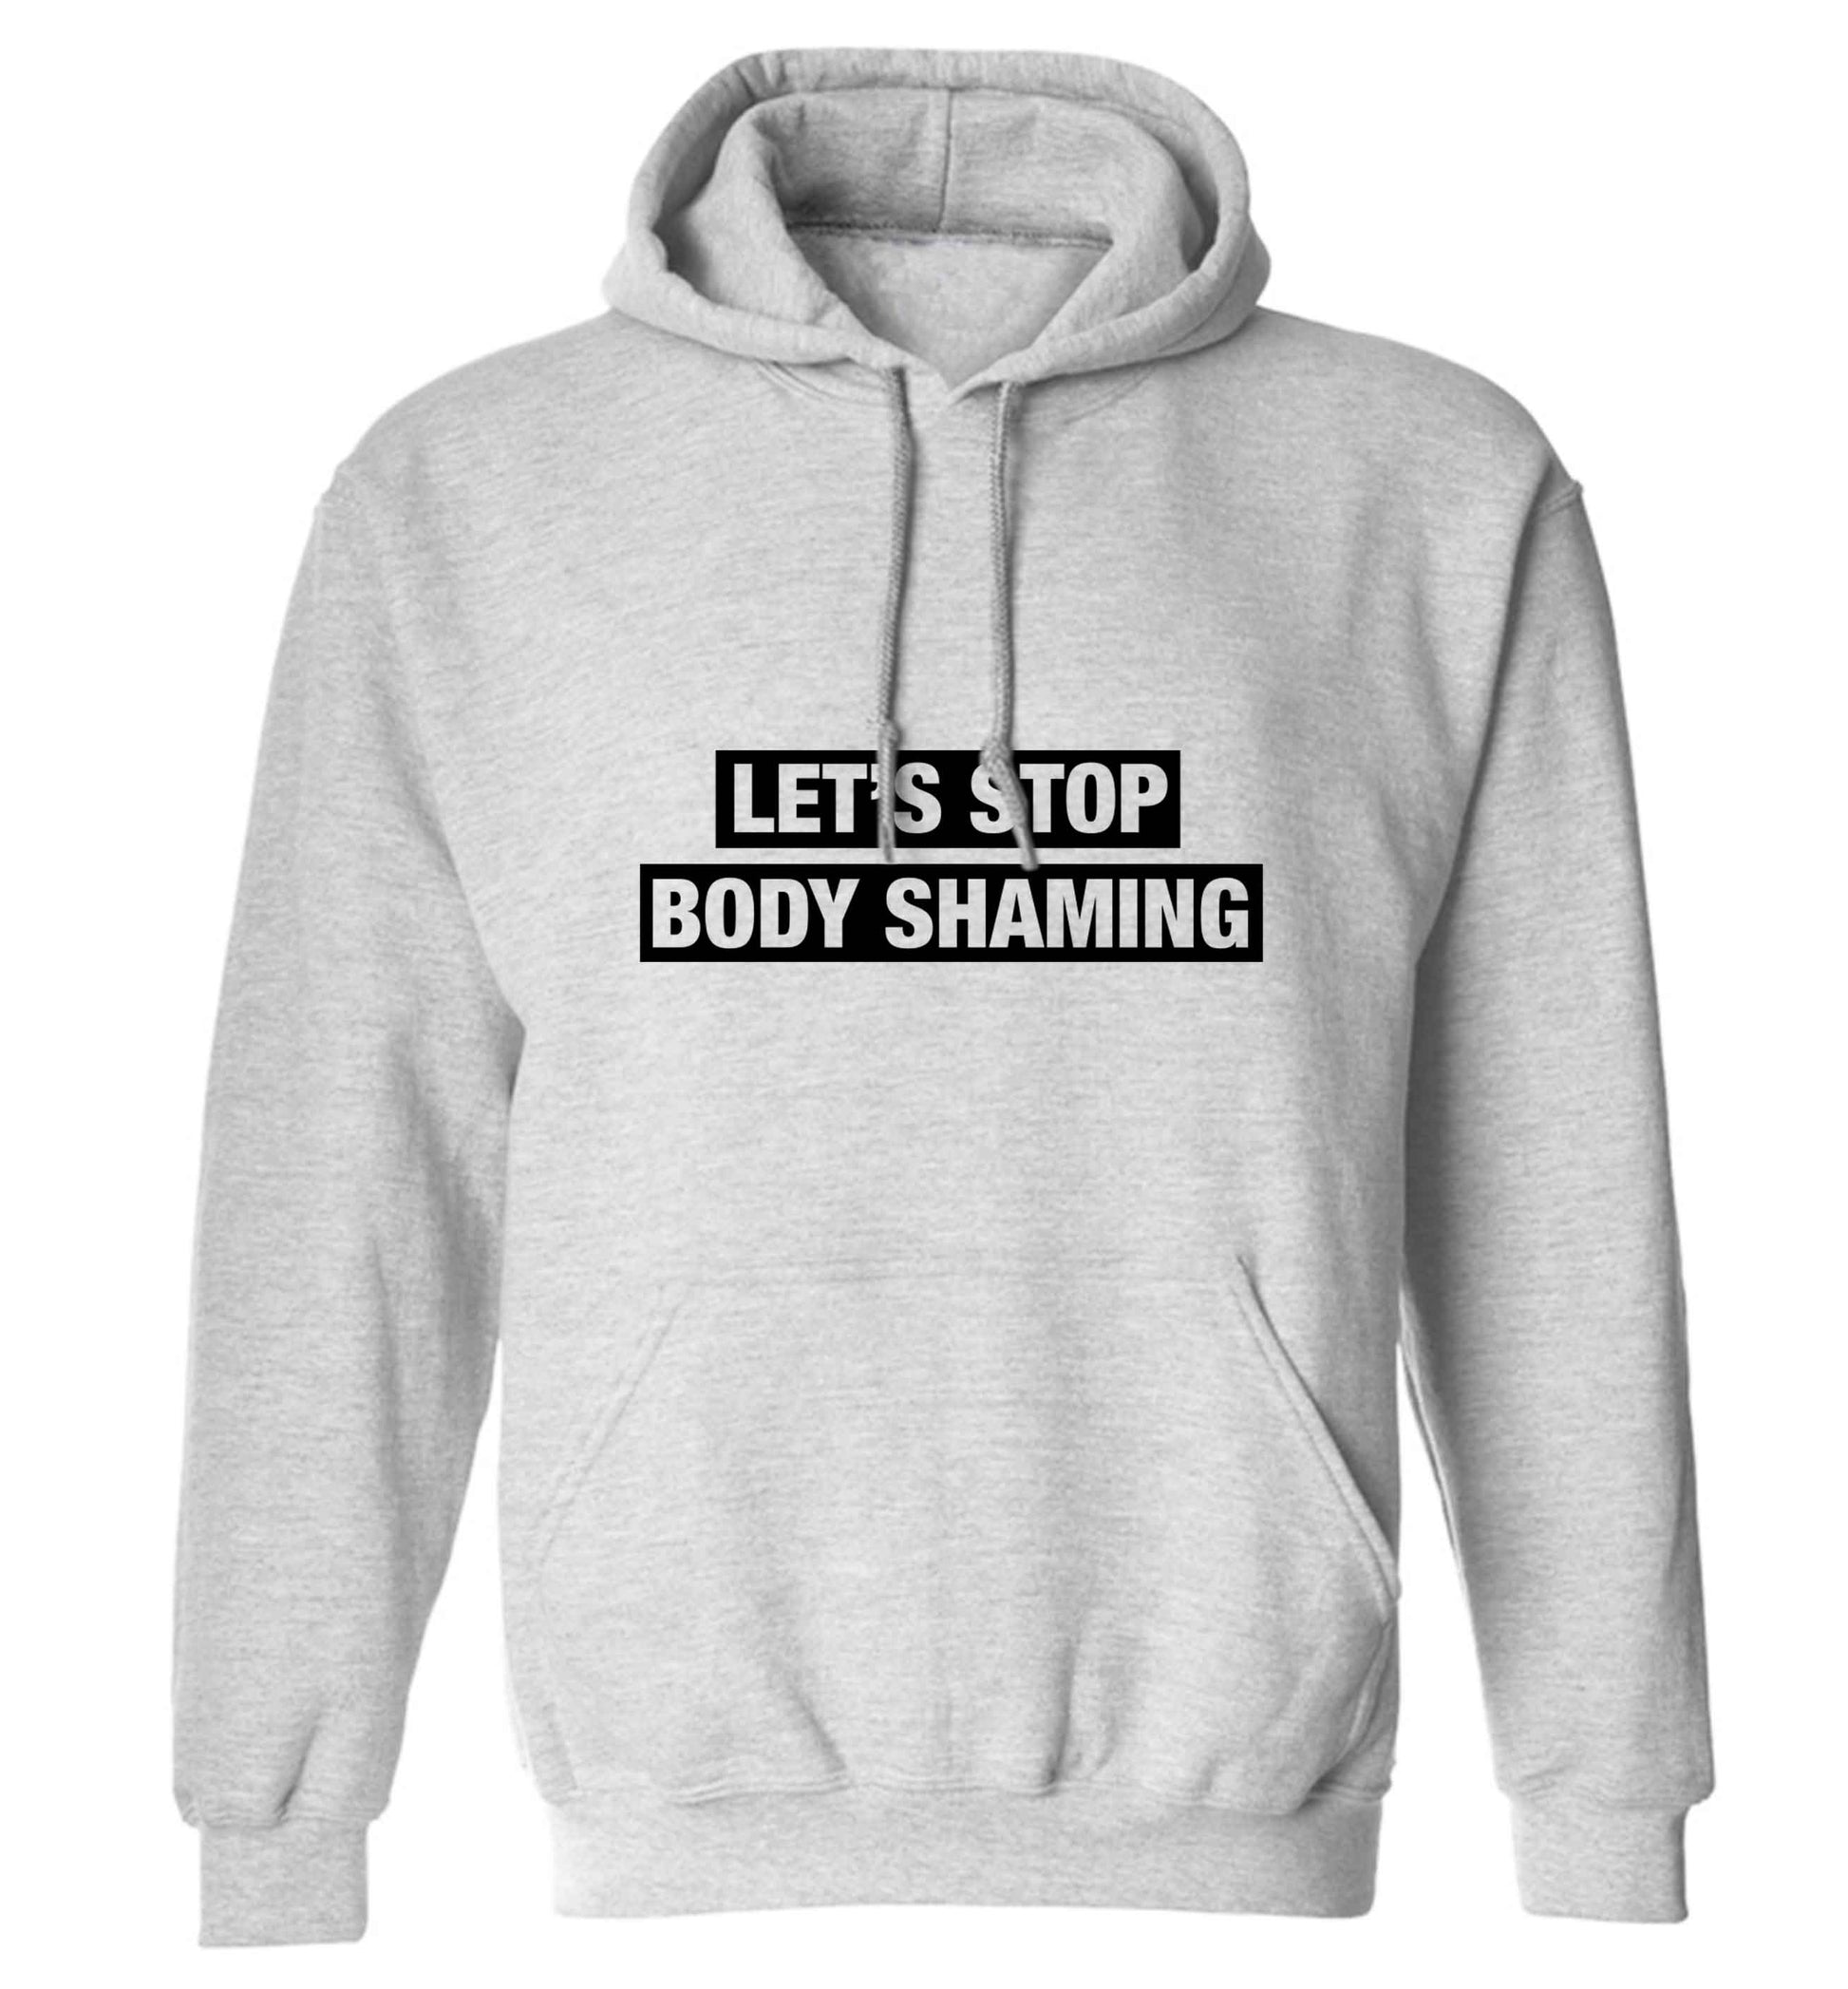 Let's stop body shaming adults unisex grey hoodie 2XL